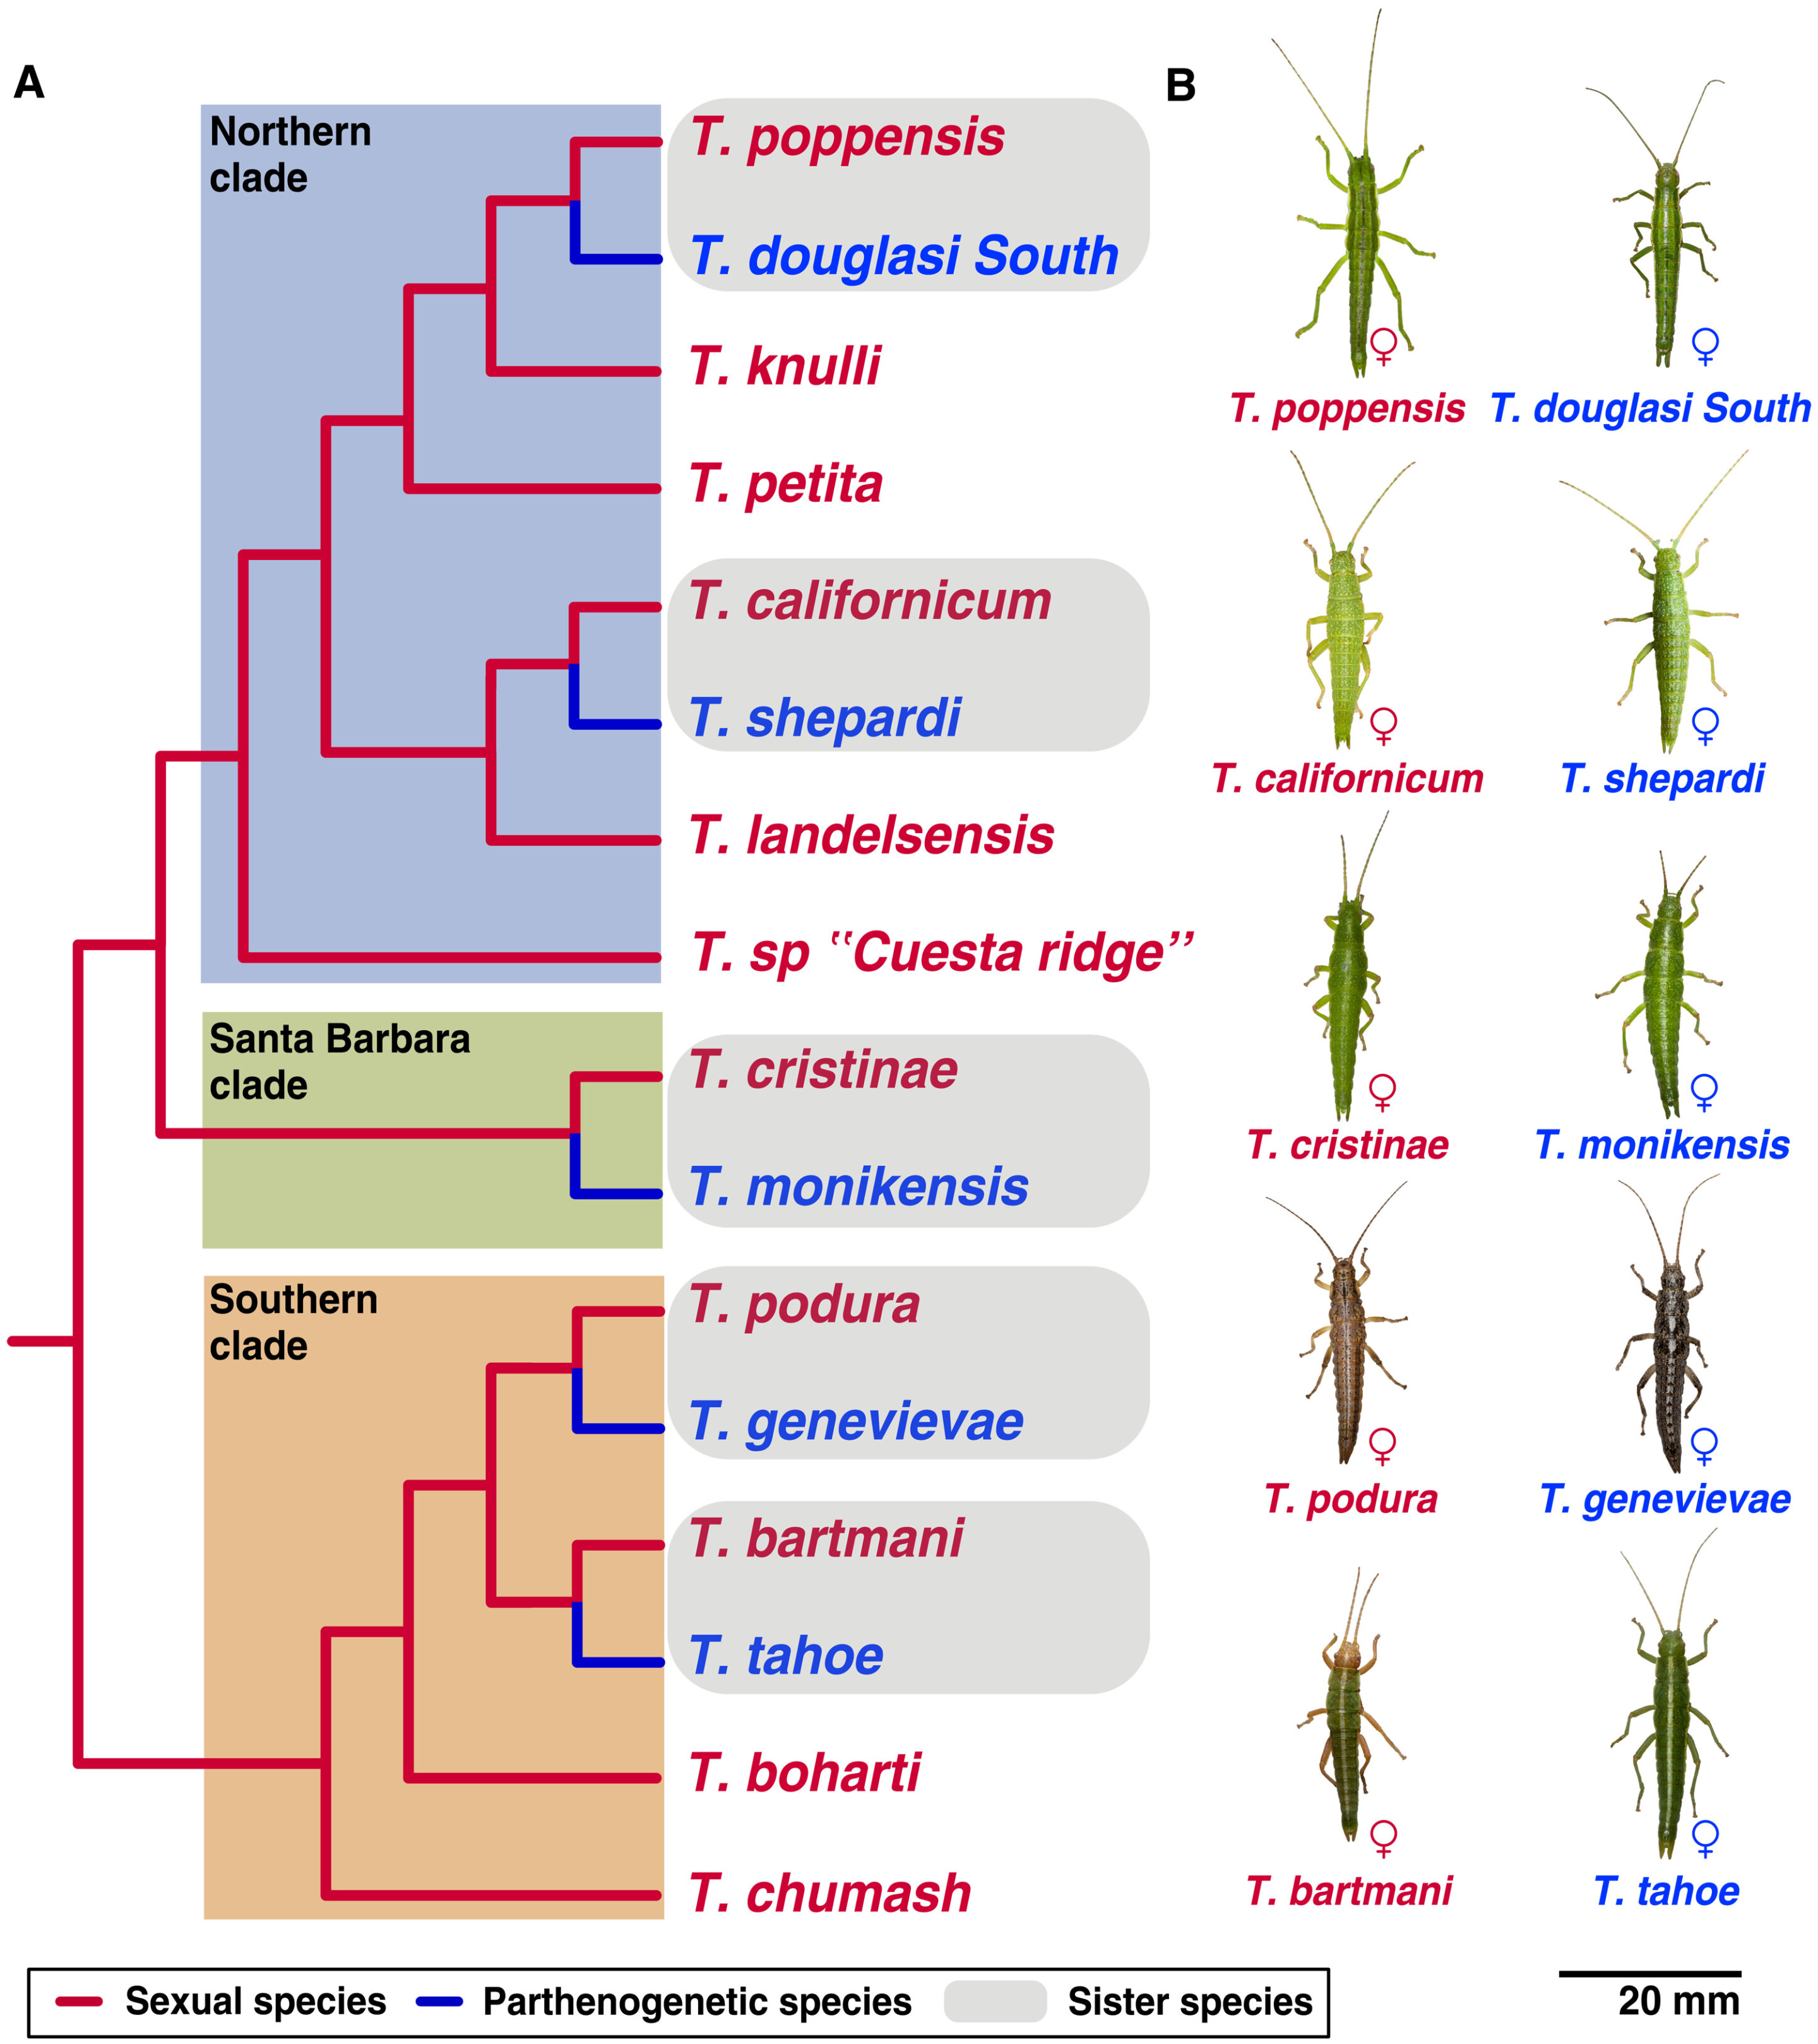 Asexual reproduction can have negative effects on genome evolution in stick  insects